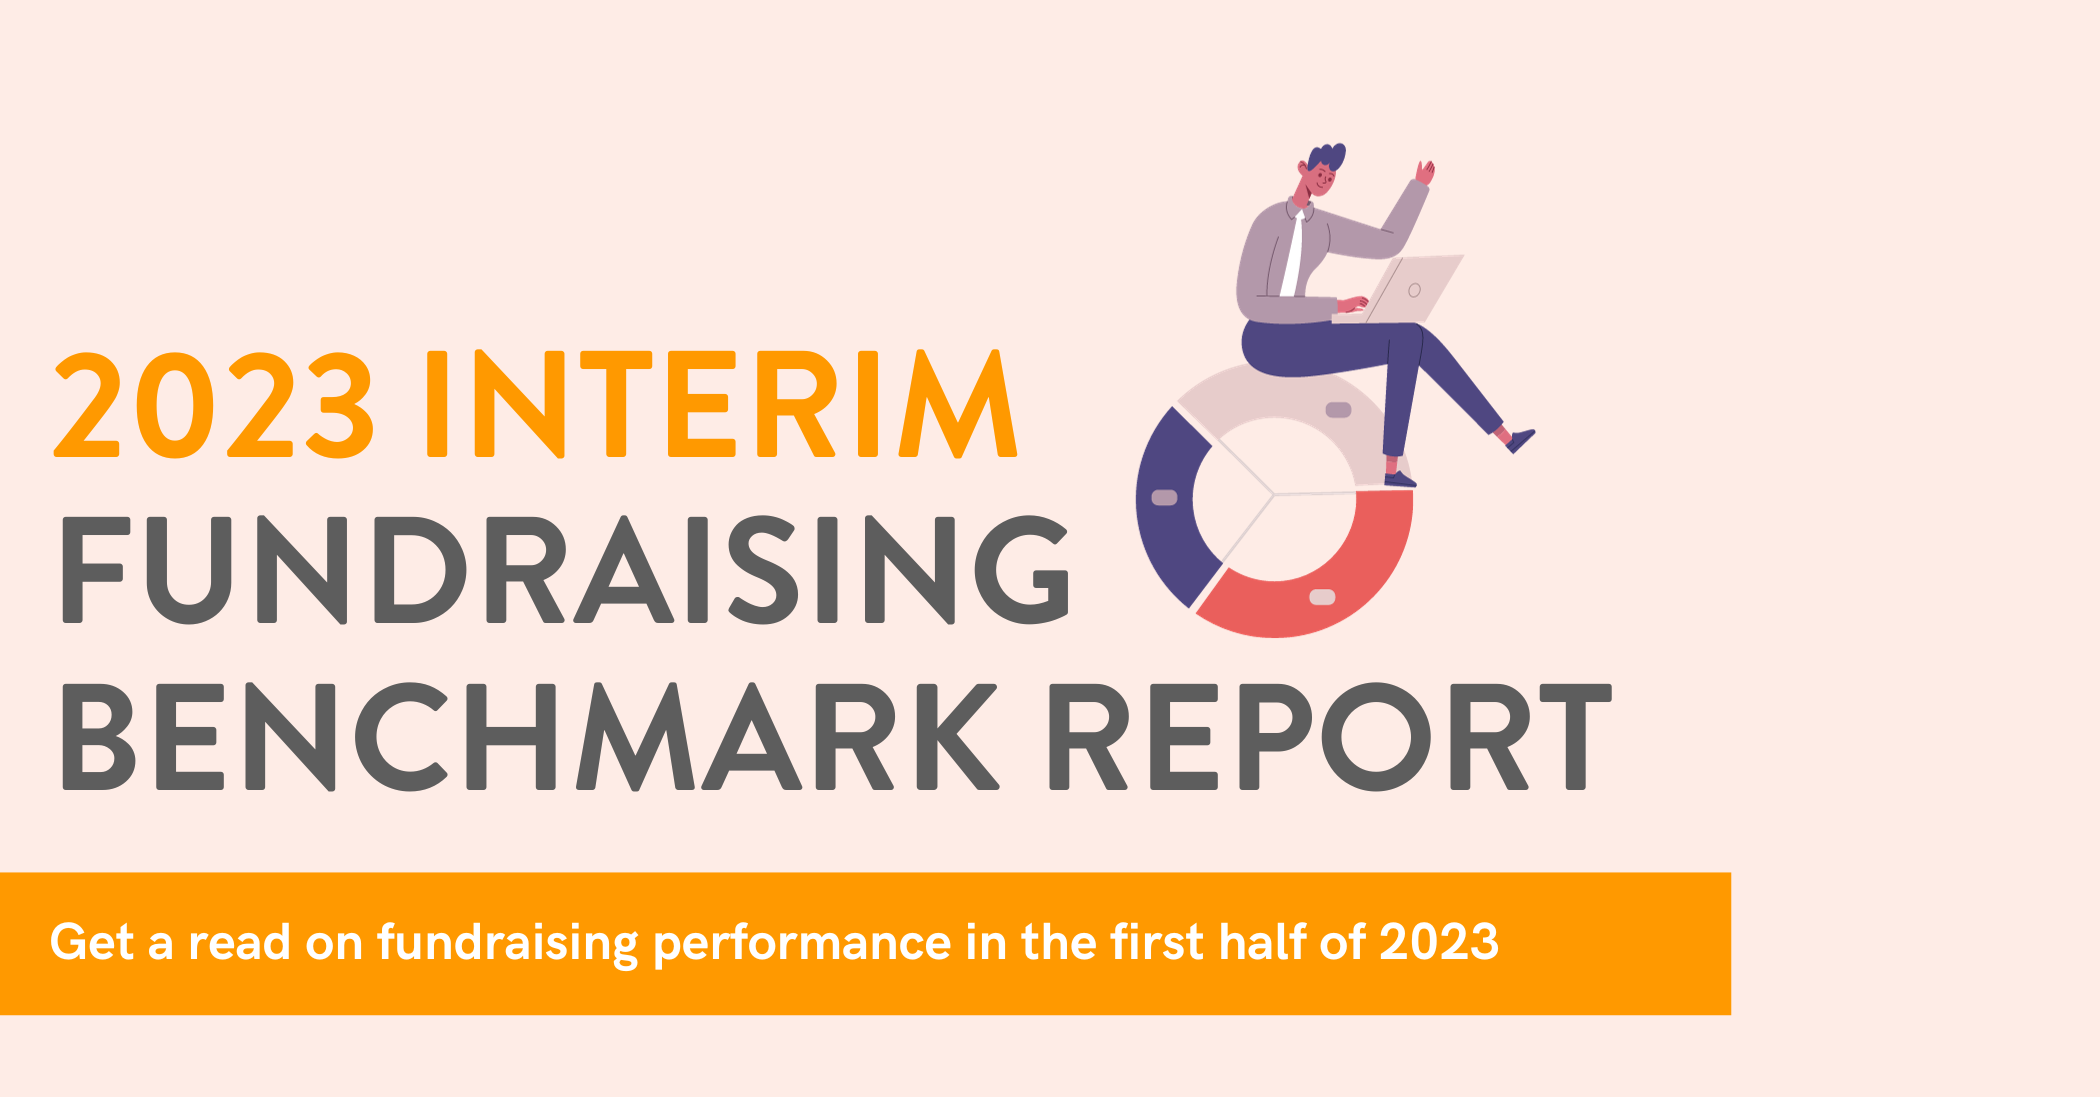 >Get Key Insights About Fundraising in 2023 with our New Benchmark Report